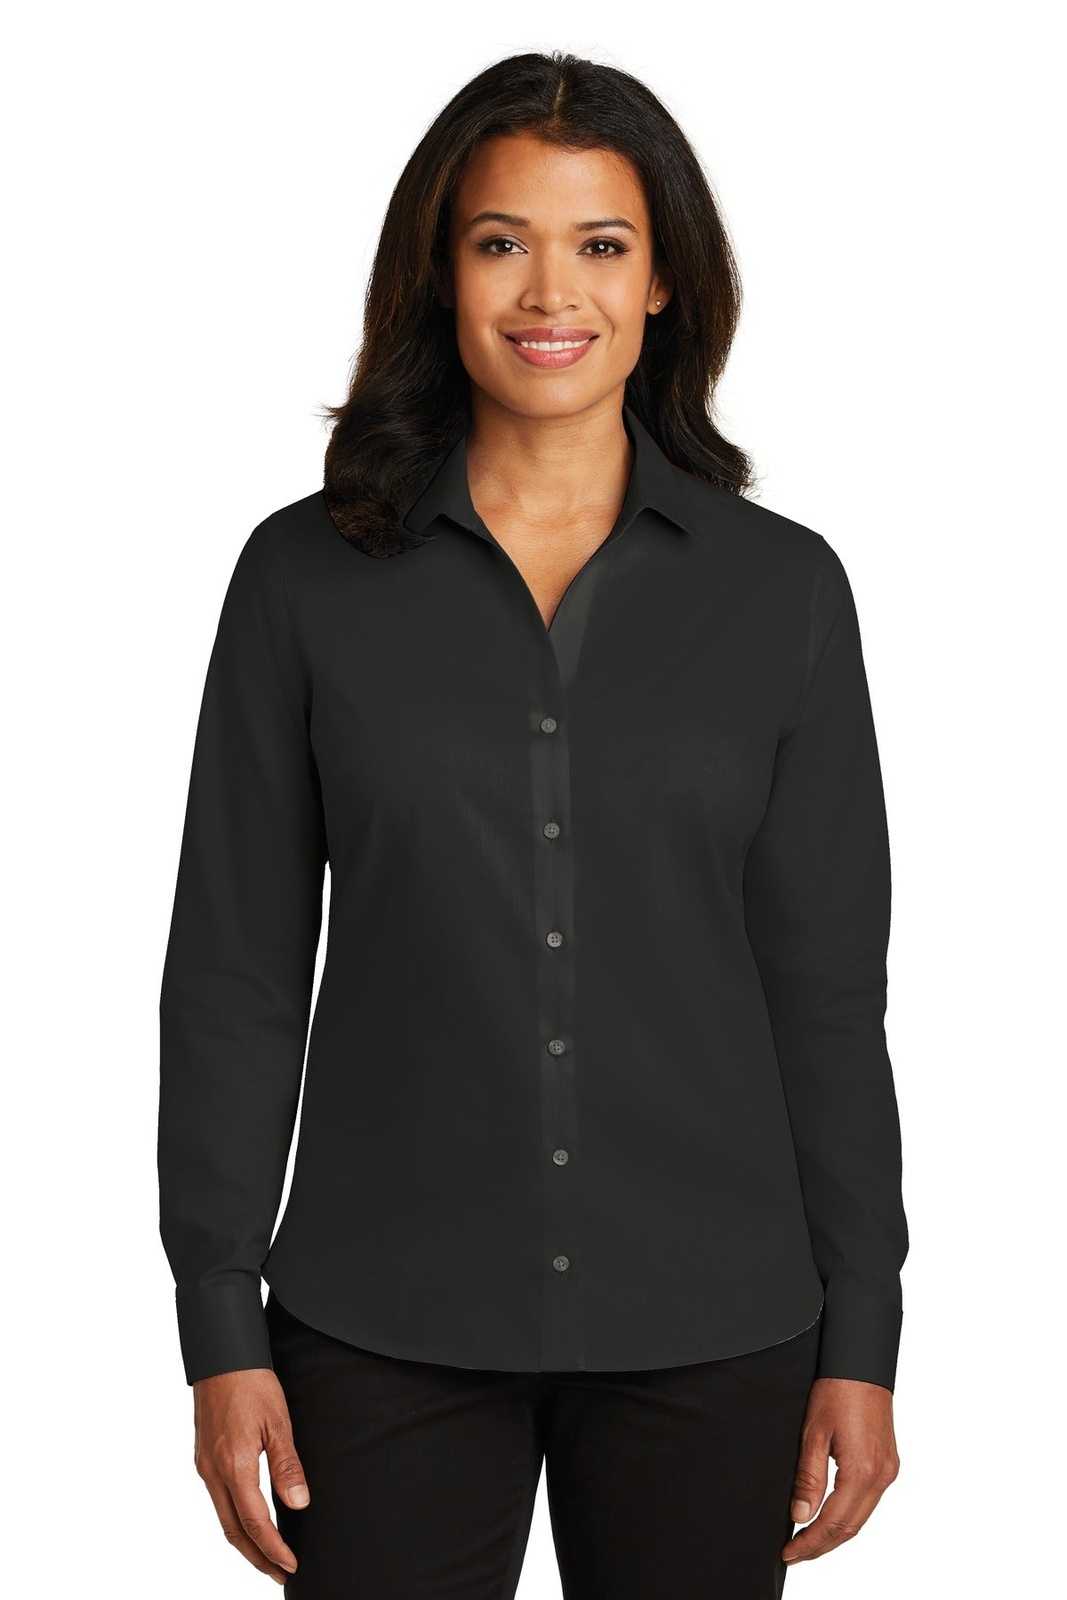 Red House RH79 Ladies Non-Iron Twill Shirt - Black - HIT a Double - 1